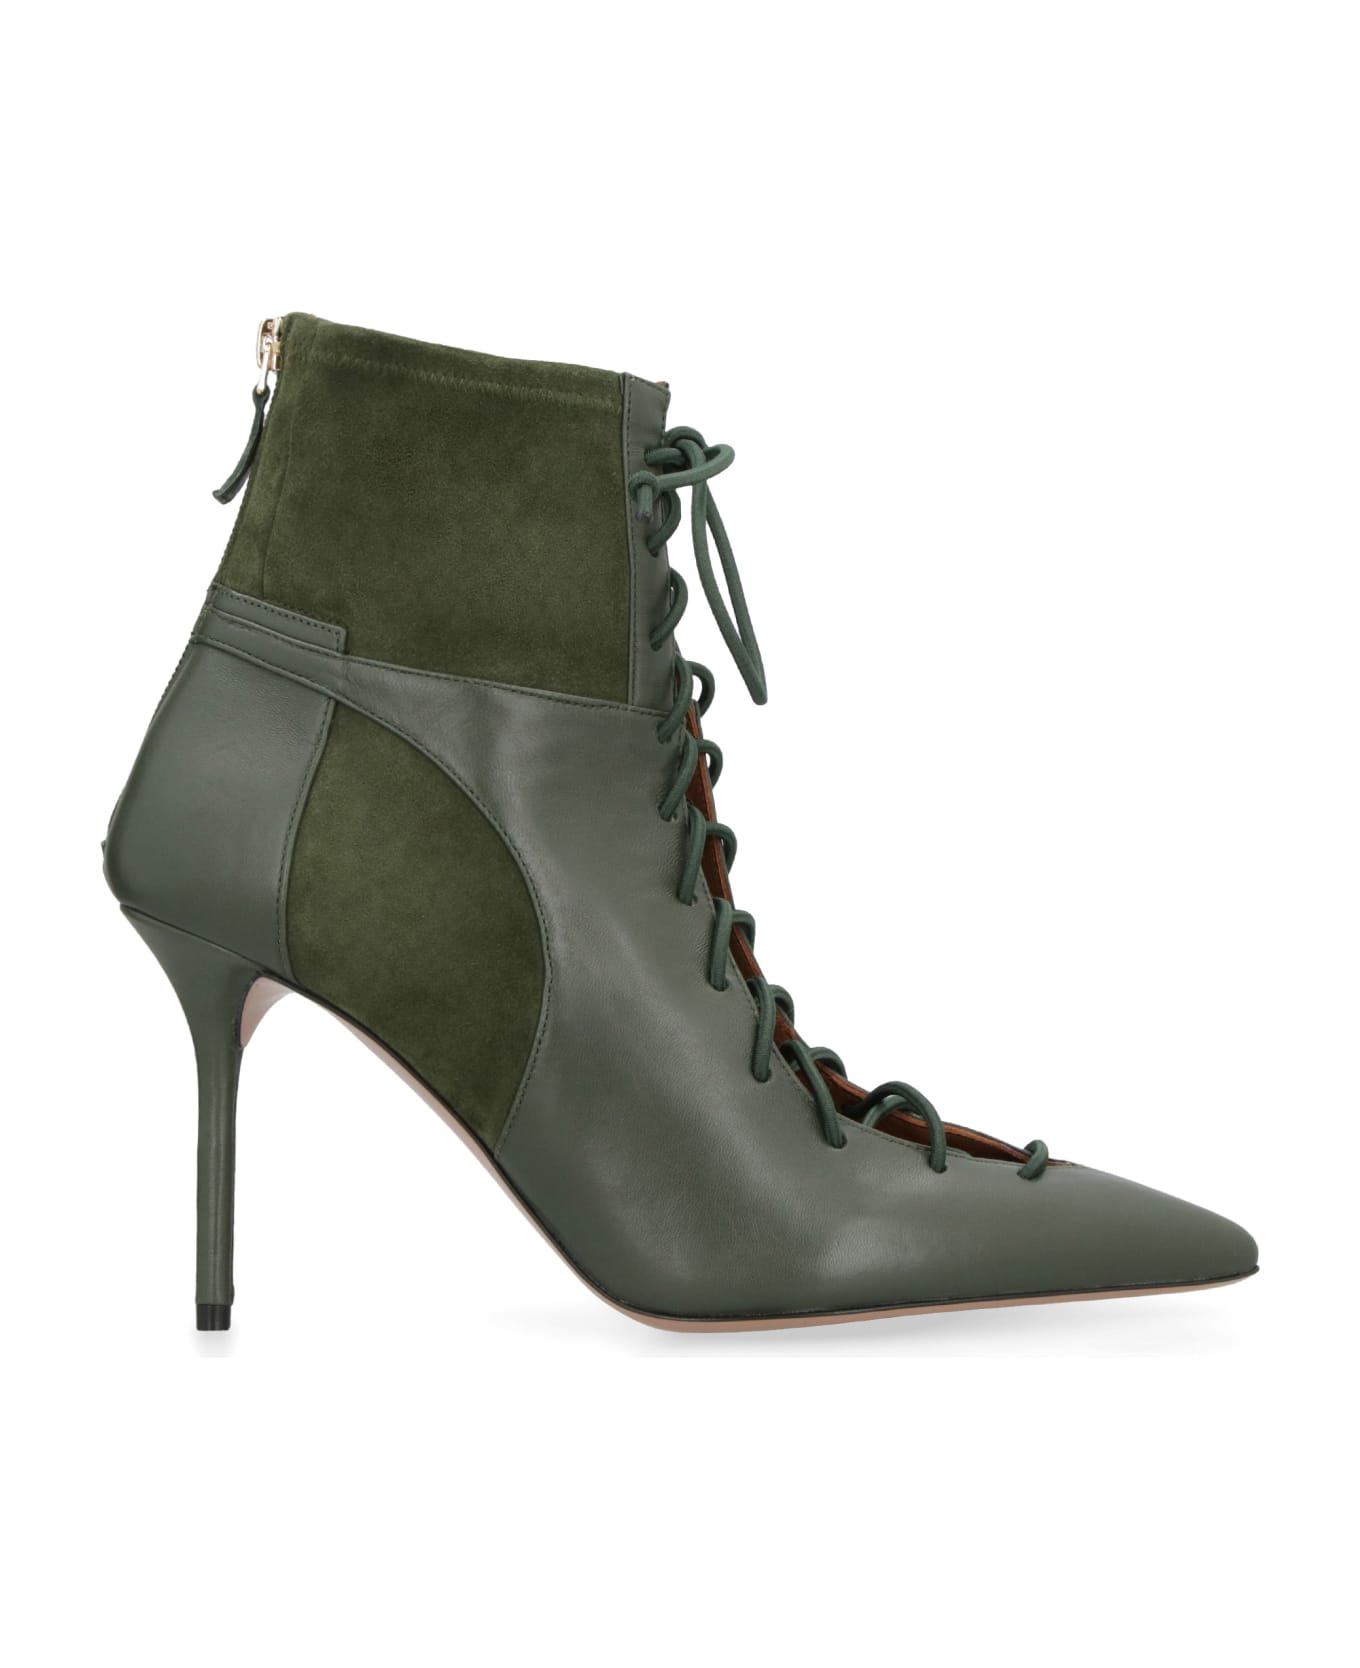 Malone Souliers Montana Suede Ankle Boots - green